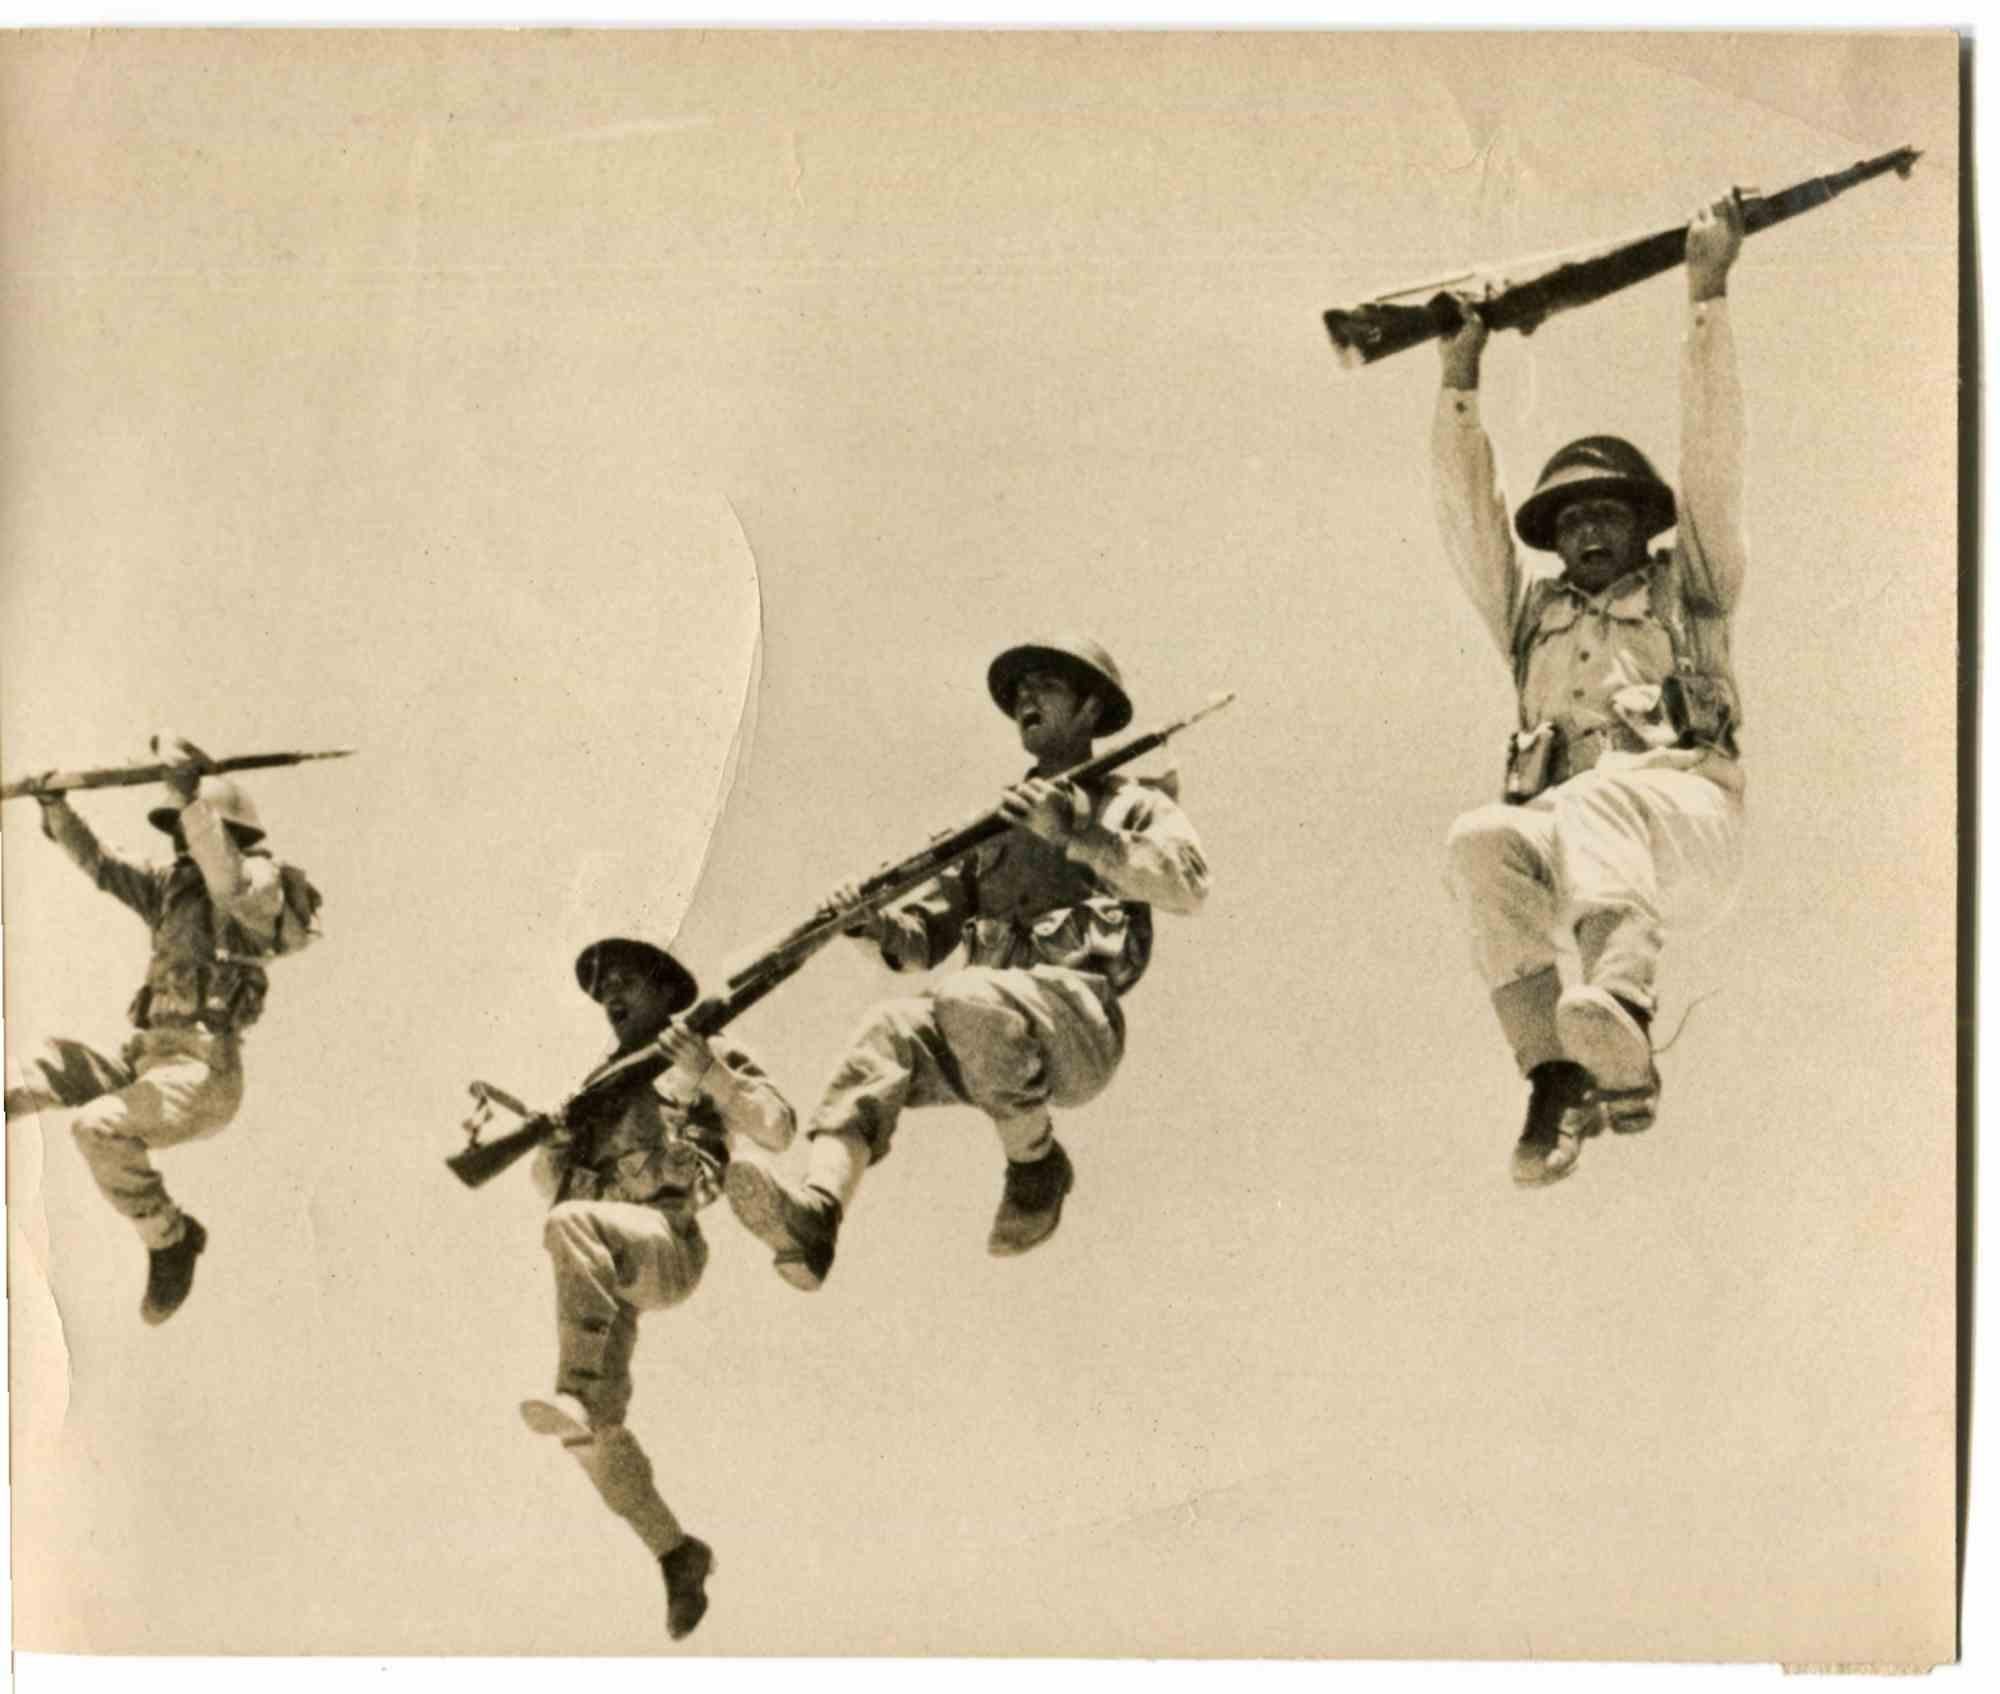 Unknown Portrait Photograph – Jumping During Military Training - Mitte des 20. Jahrhunderts